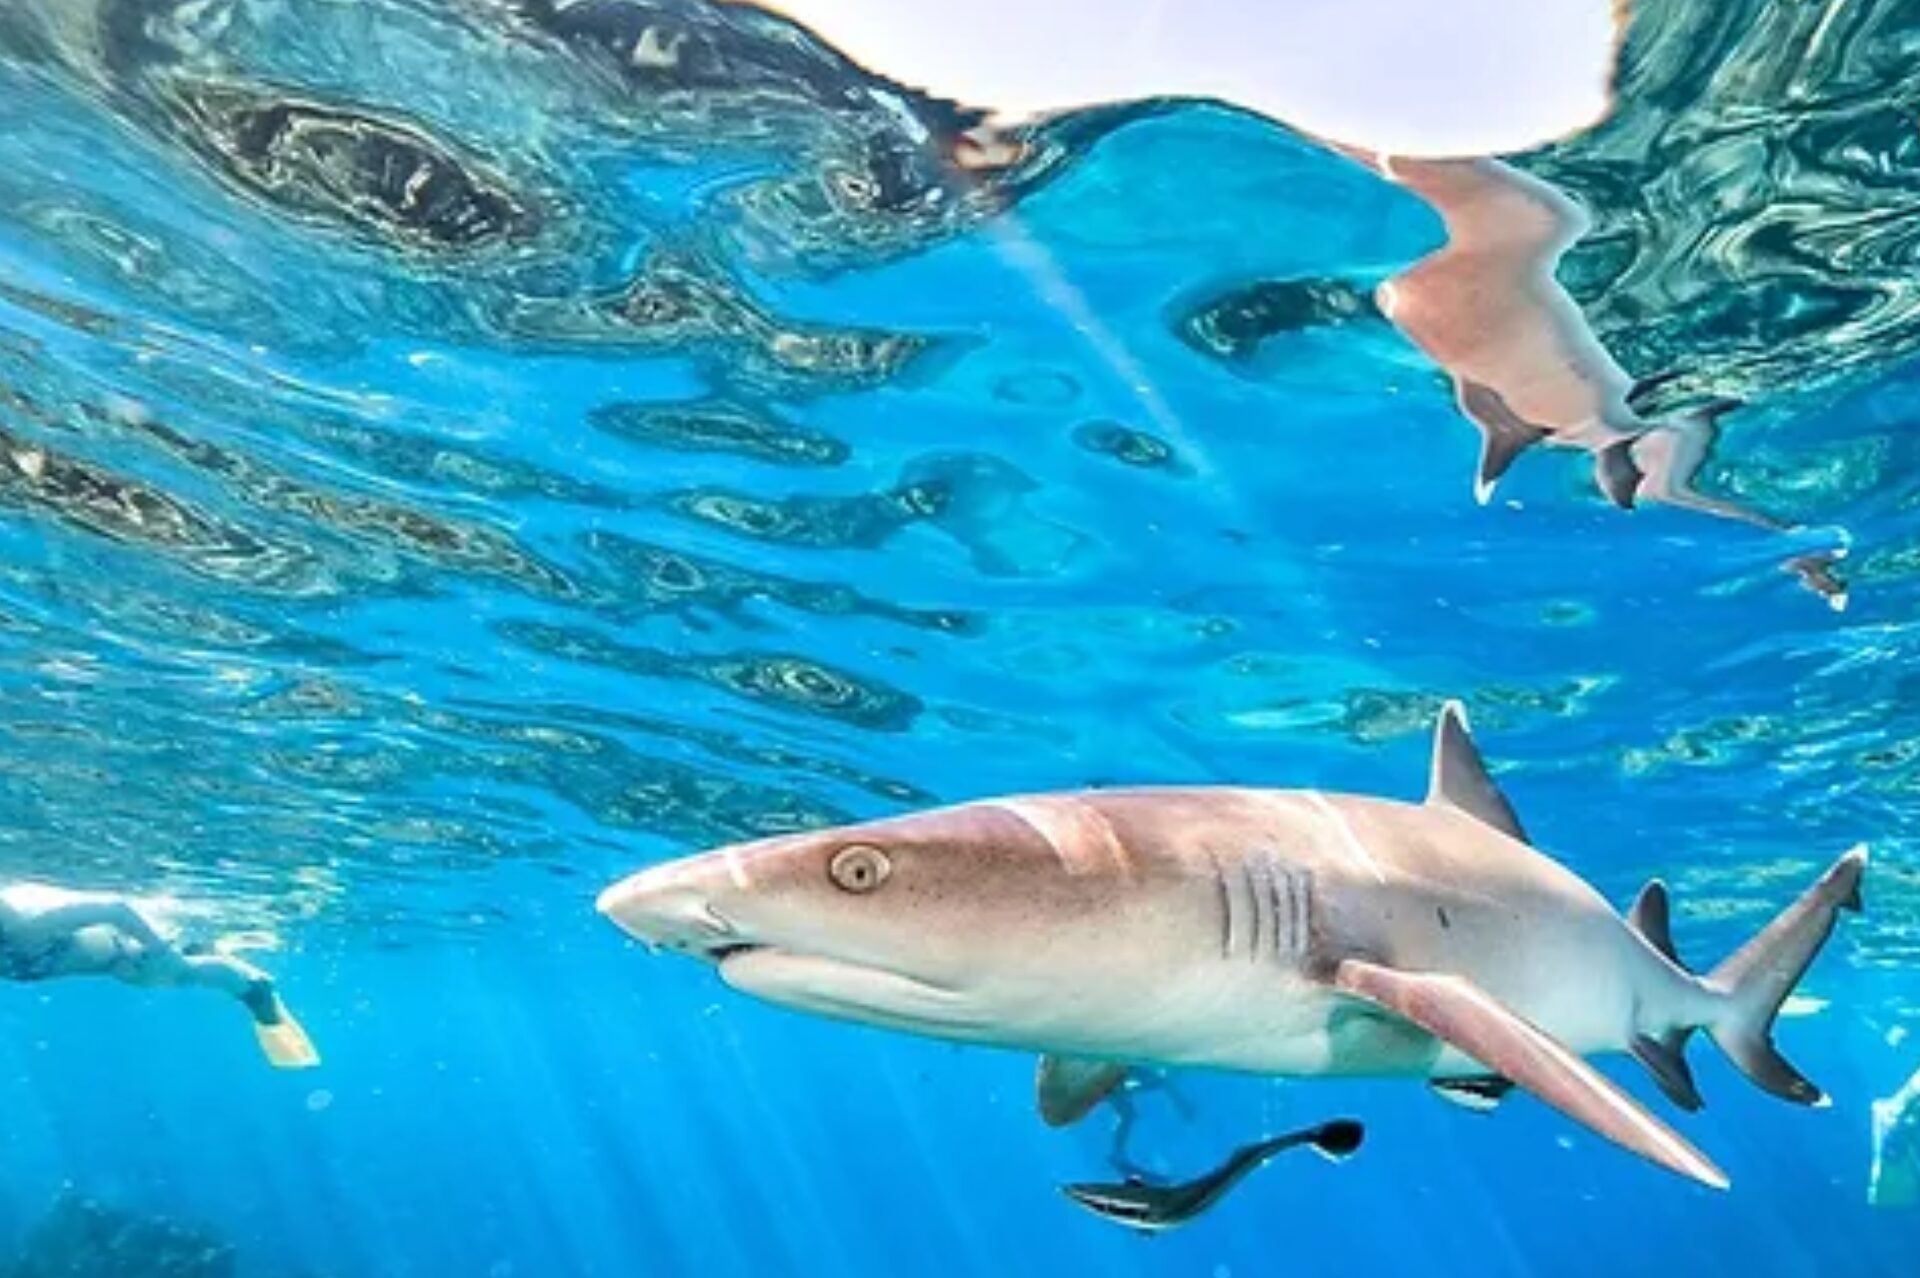 Barefoot Kuata Island Resort in Fiji is Famous for Sharks